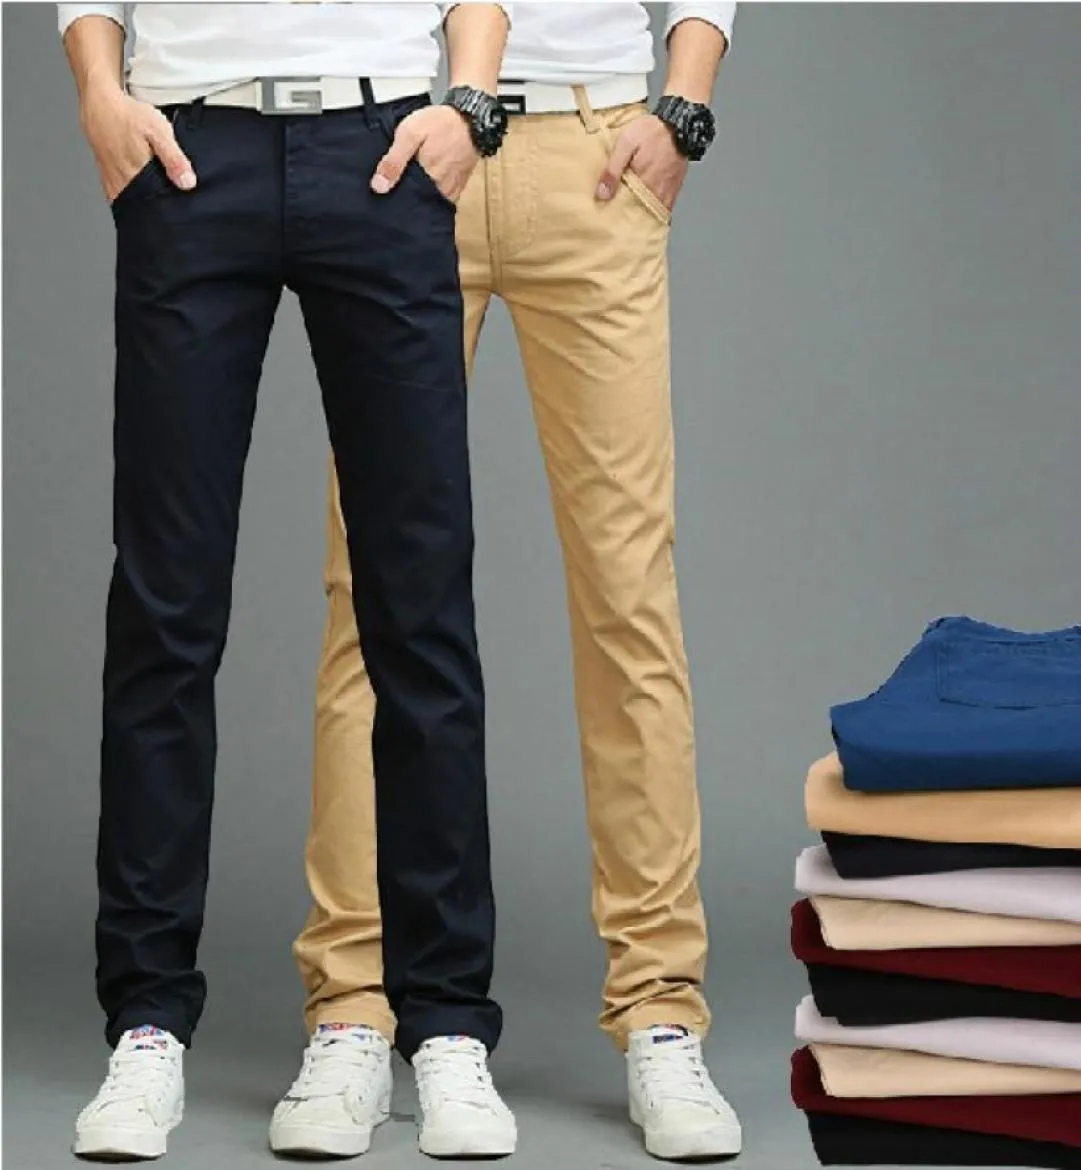 Whole New Arrival Men Pants Men039s Slim Fit Casual Pants Fashion Straight Dress Pants Skinny Smooth Full Length Trousers2915162